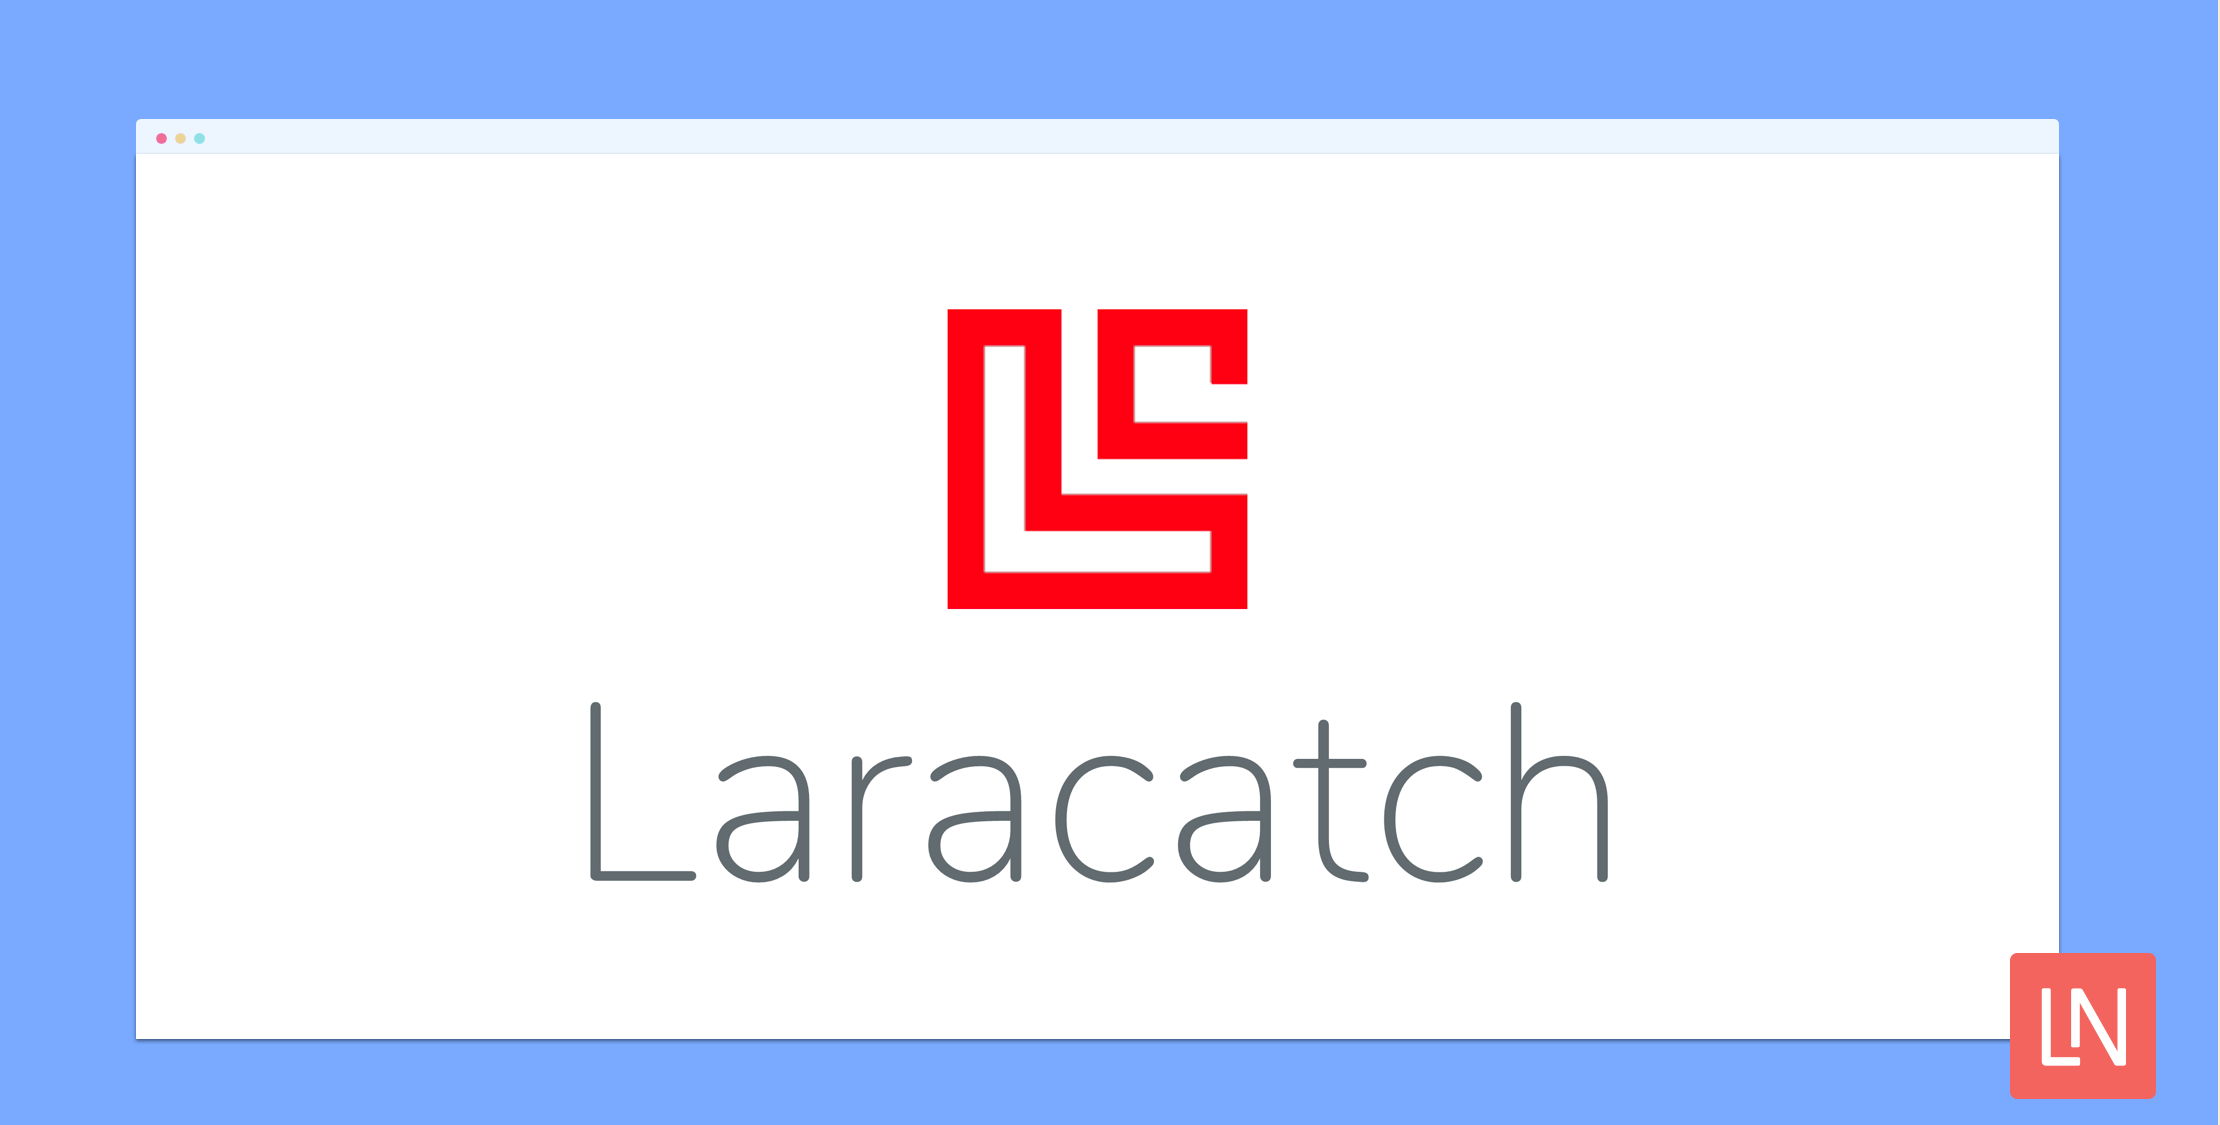 Laracatch is a Customizable Error Page for Laravel image